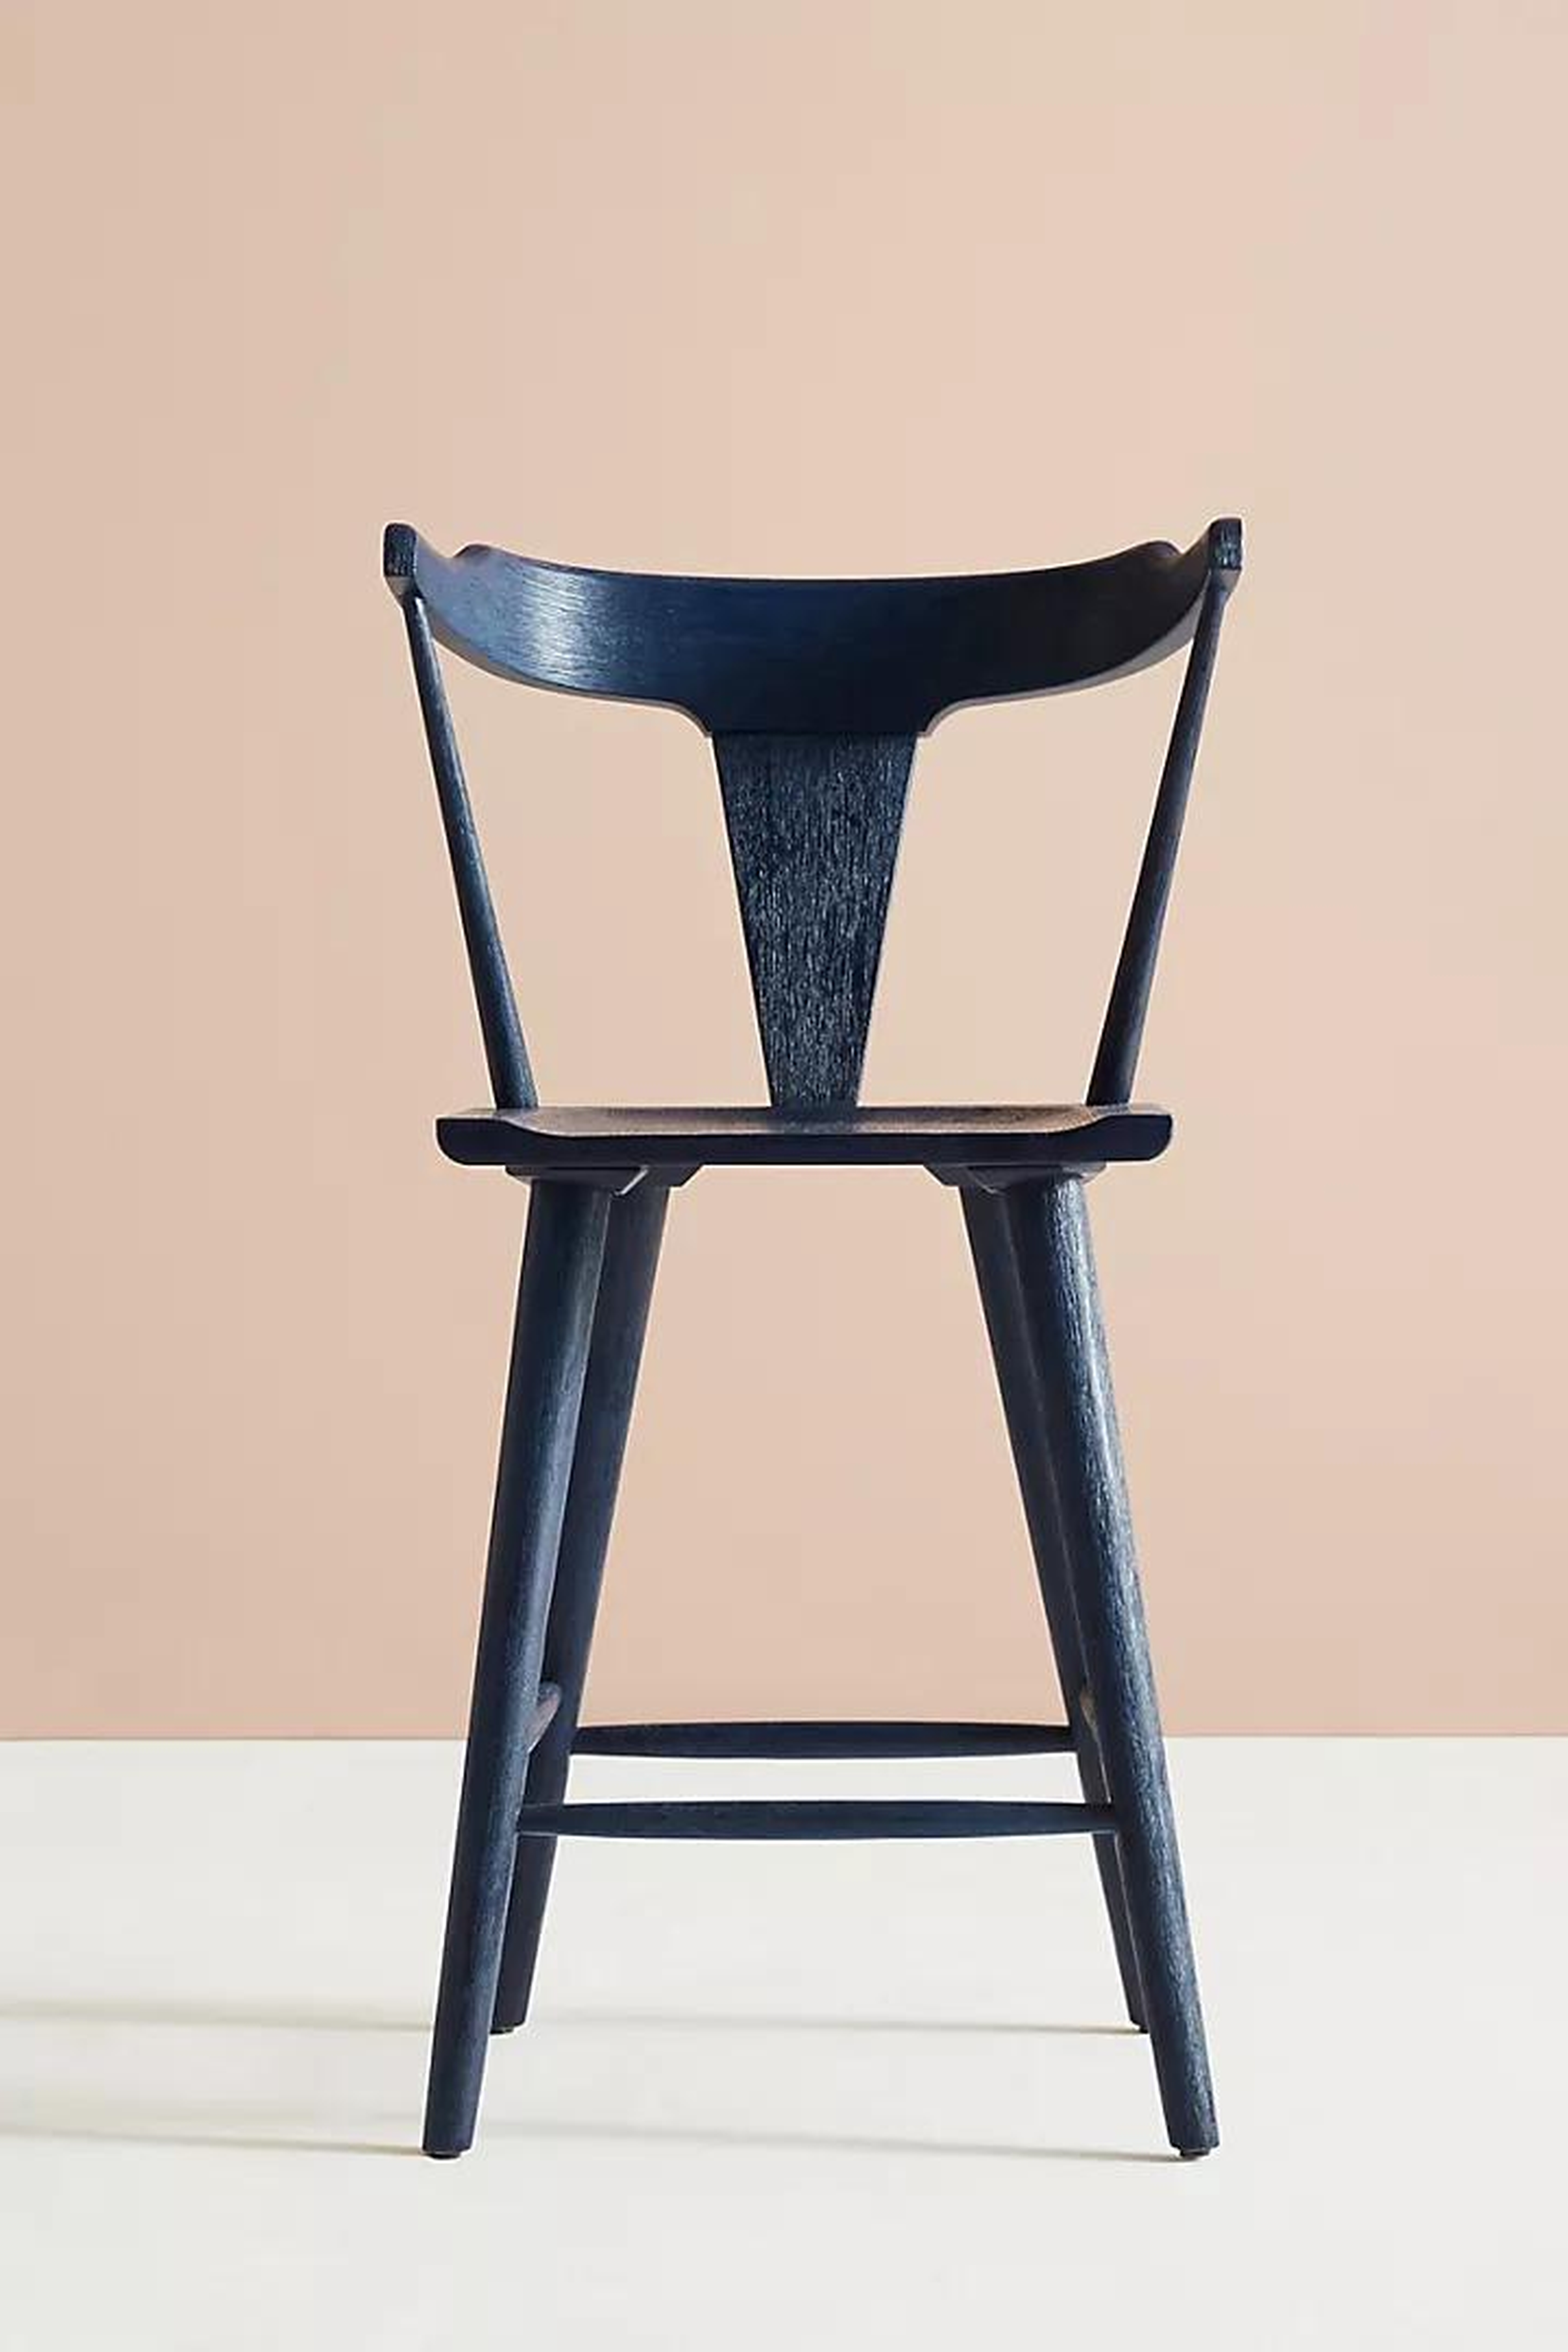 Mackinder Counter Stool By Anthropologie in Blue - Anthropologie